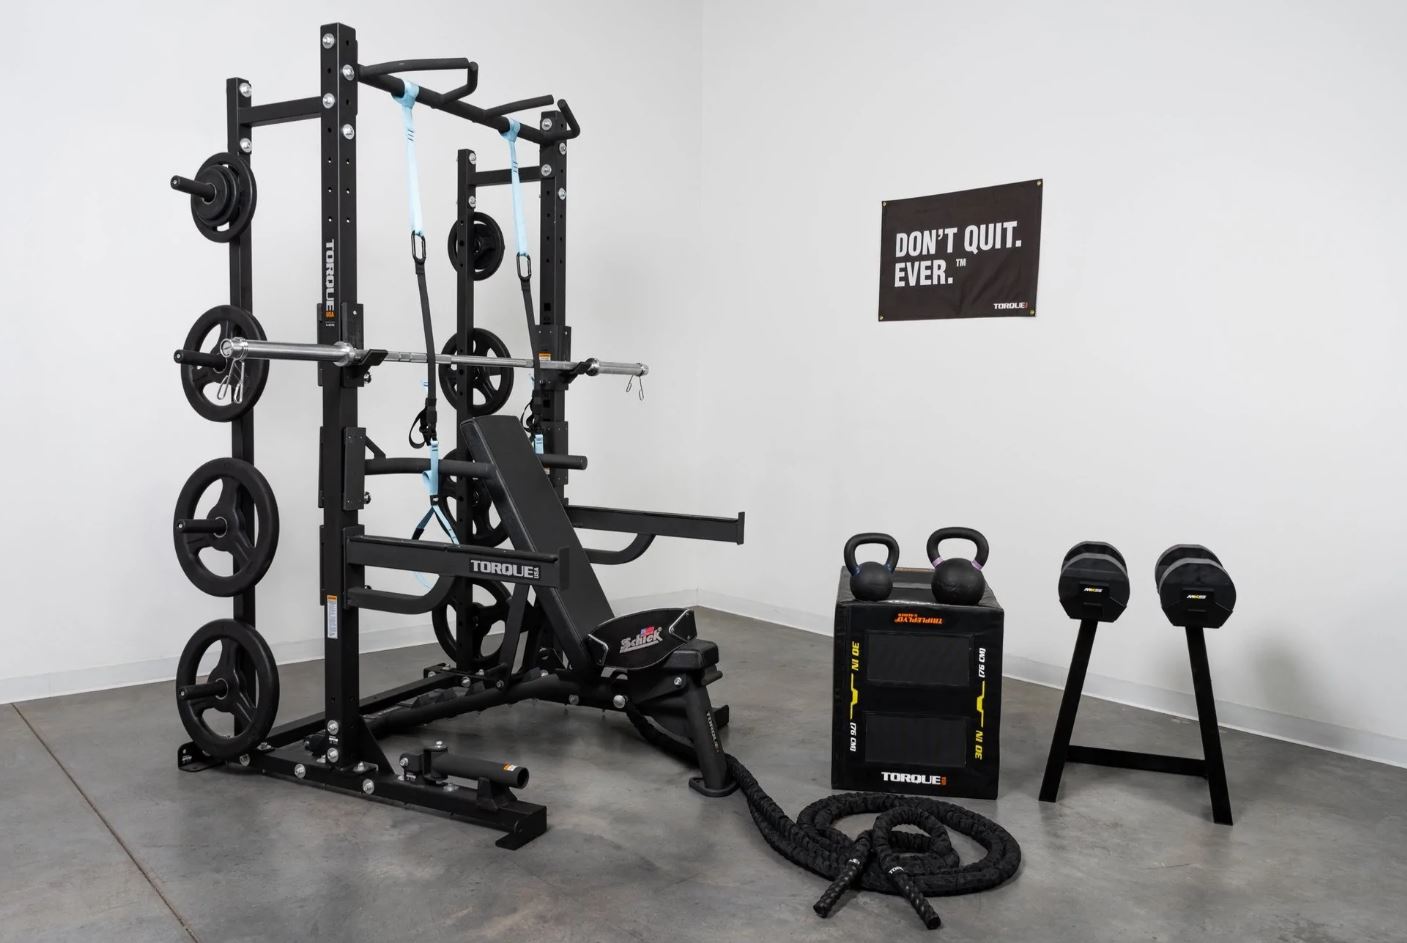 Best place for your home gym in the UAE